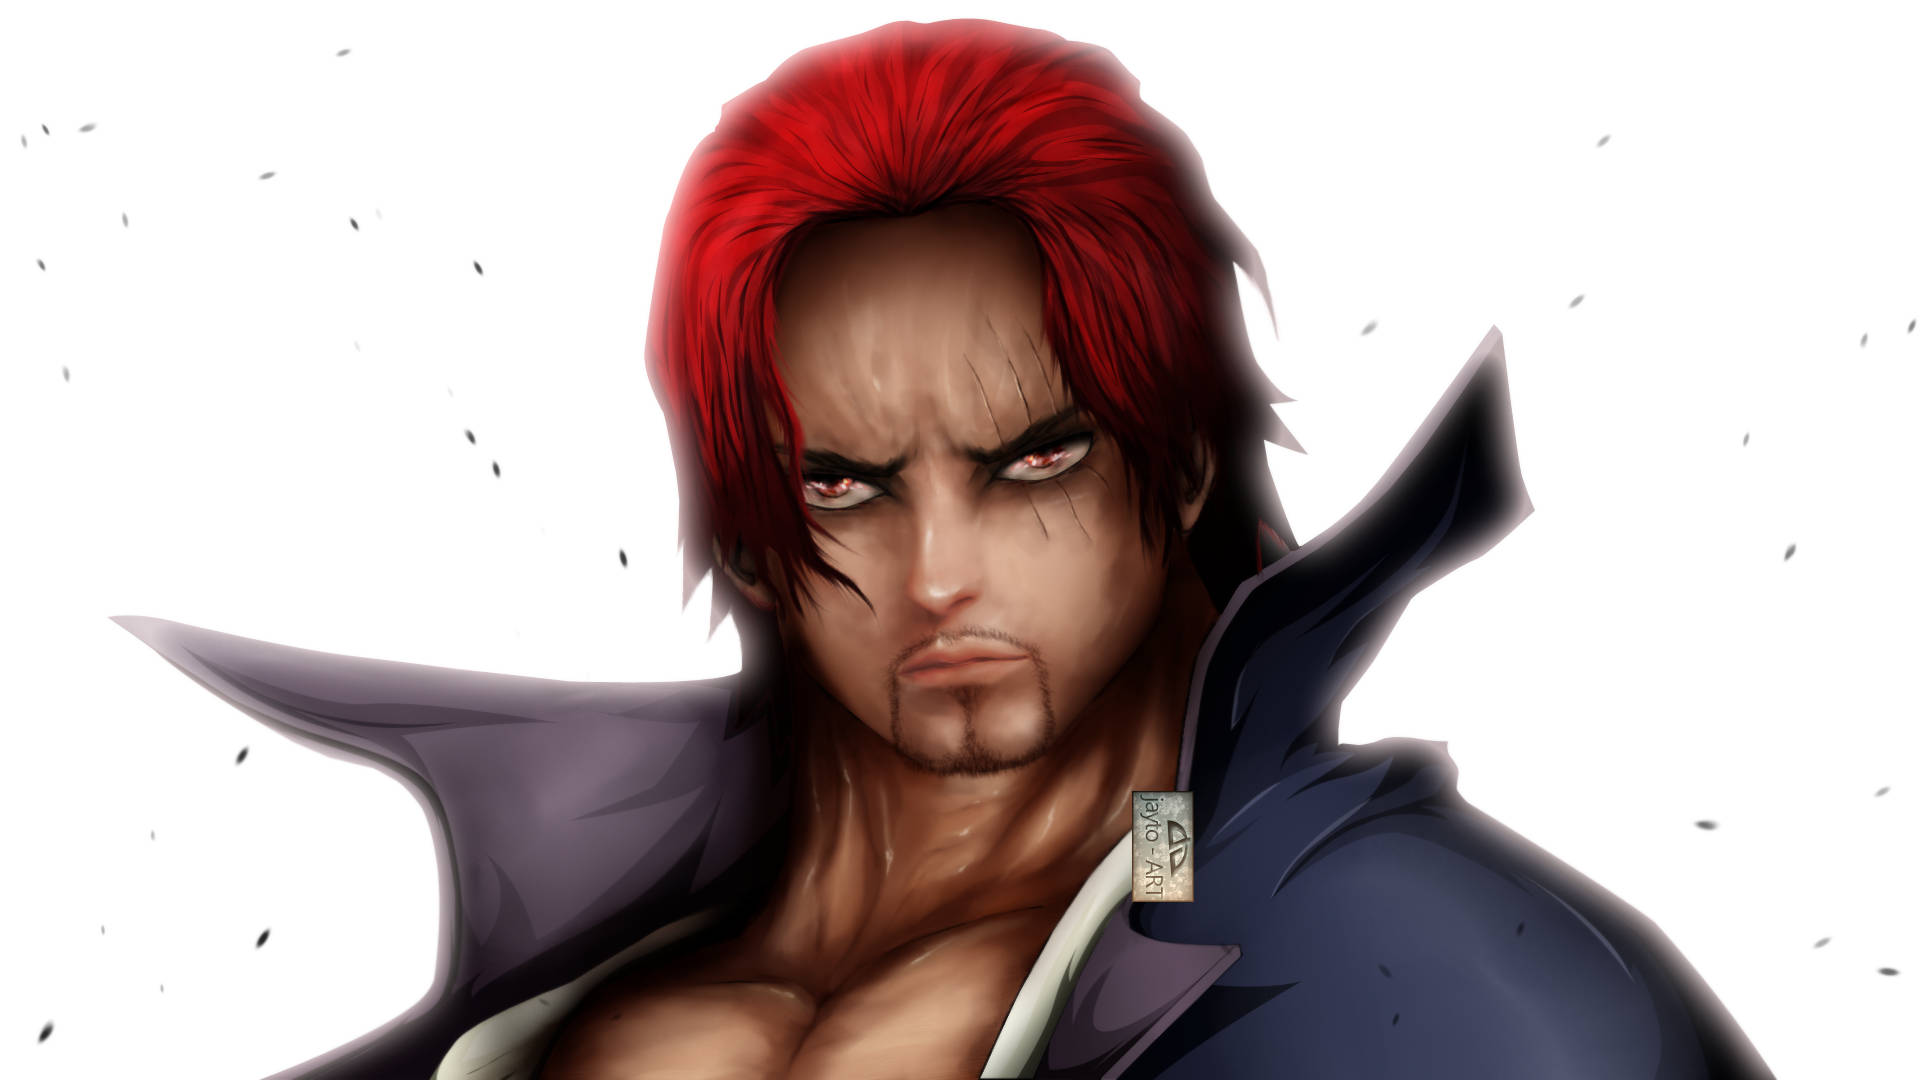 Download Shanks wallpaper by AnbuCapalot  f4  Free on ZEDGE now Browse  millions of popular one piec  Manga anime one piece Anime One piece  wallpaper iphone